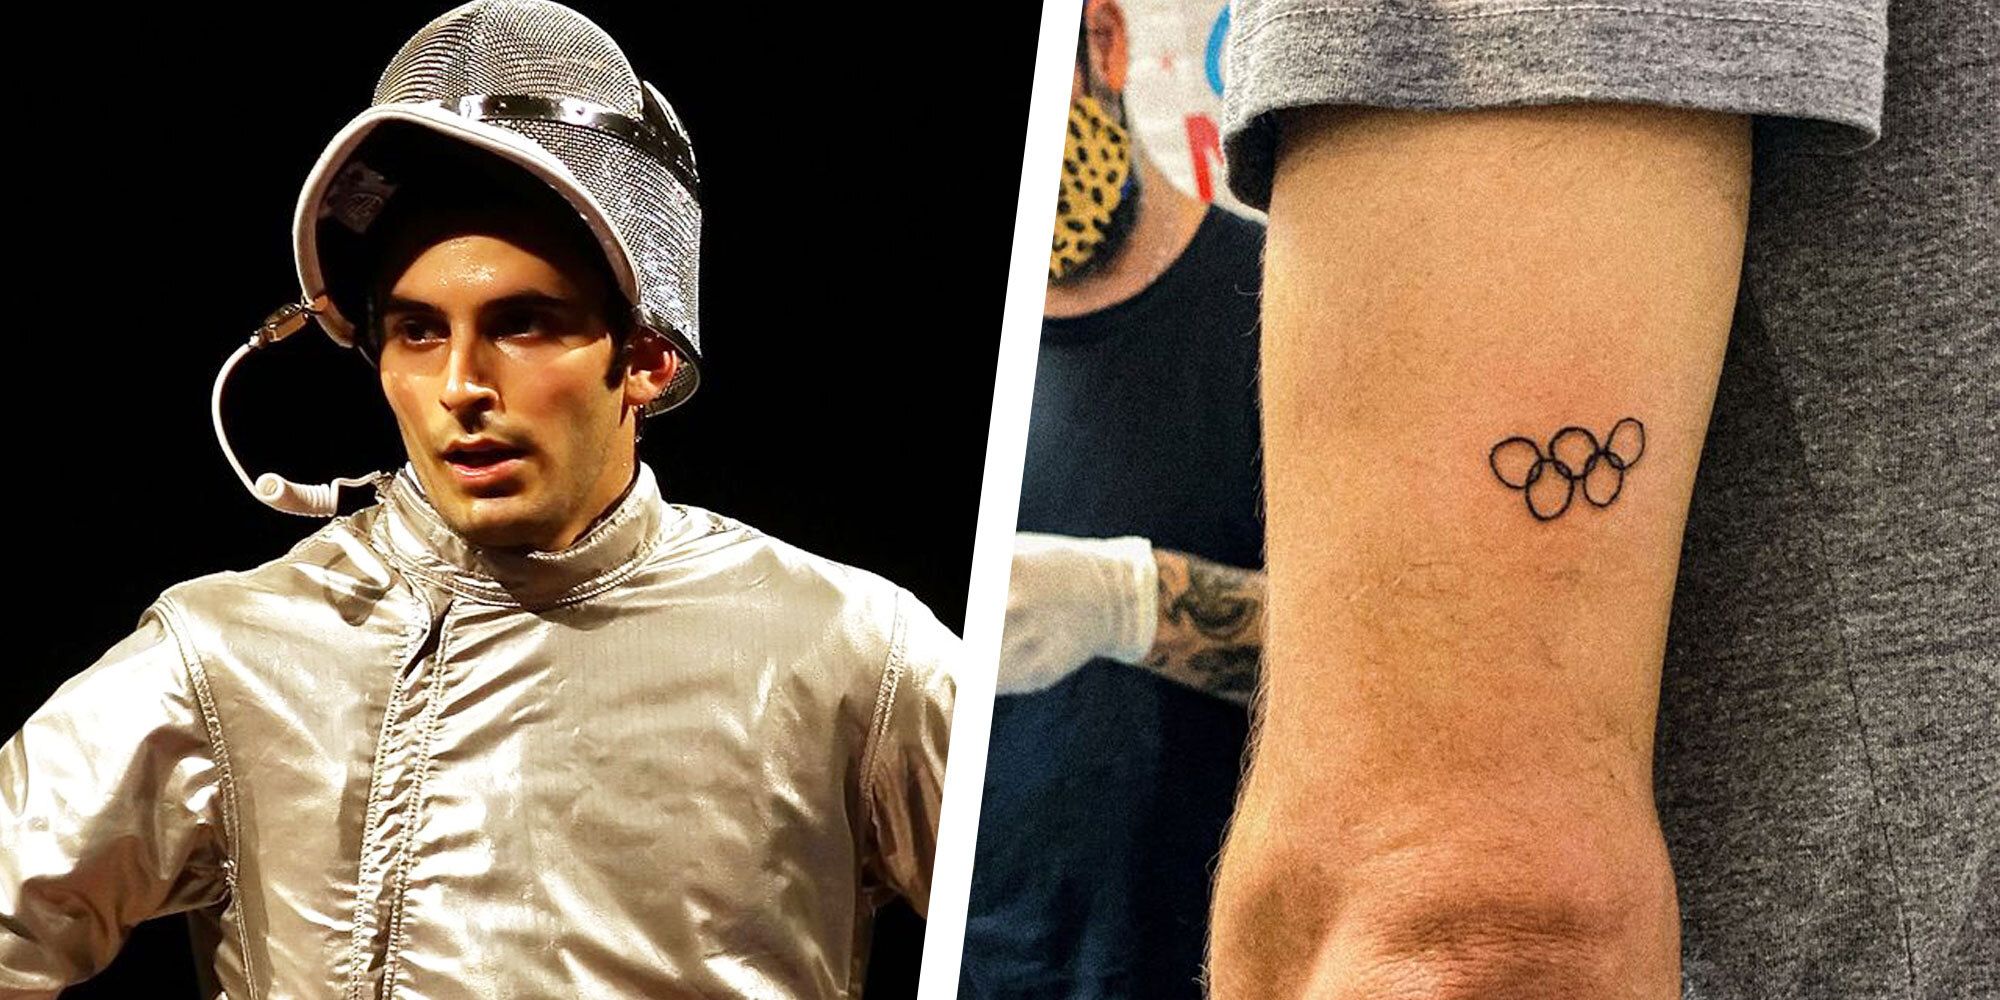 Olympic Athlete's Tattoo Ruined by Postponed Games